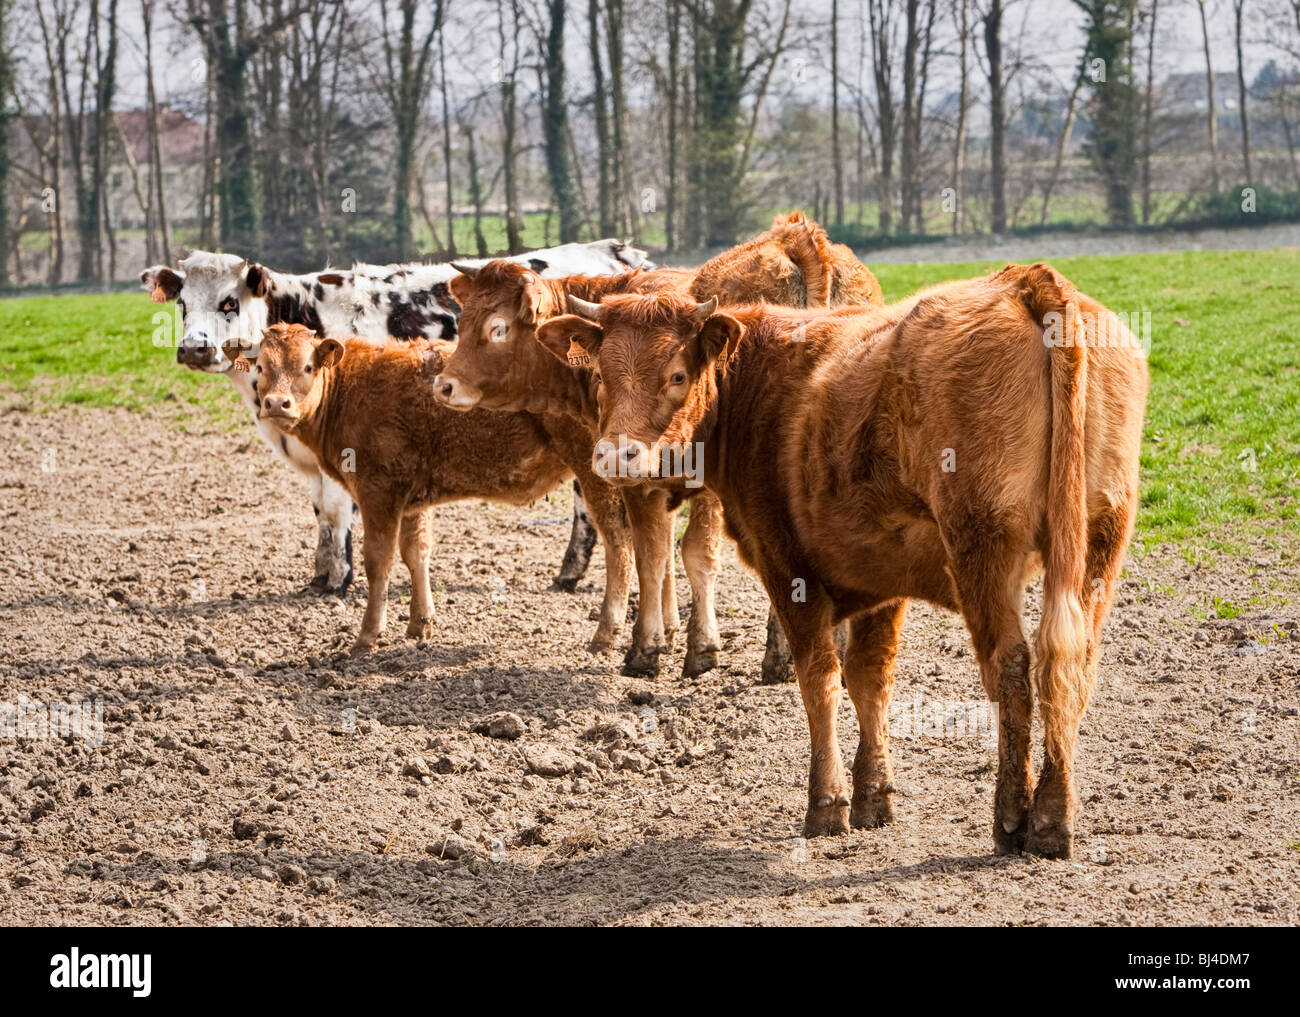 Cows in a field Stock Photo